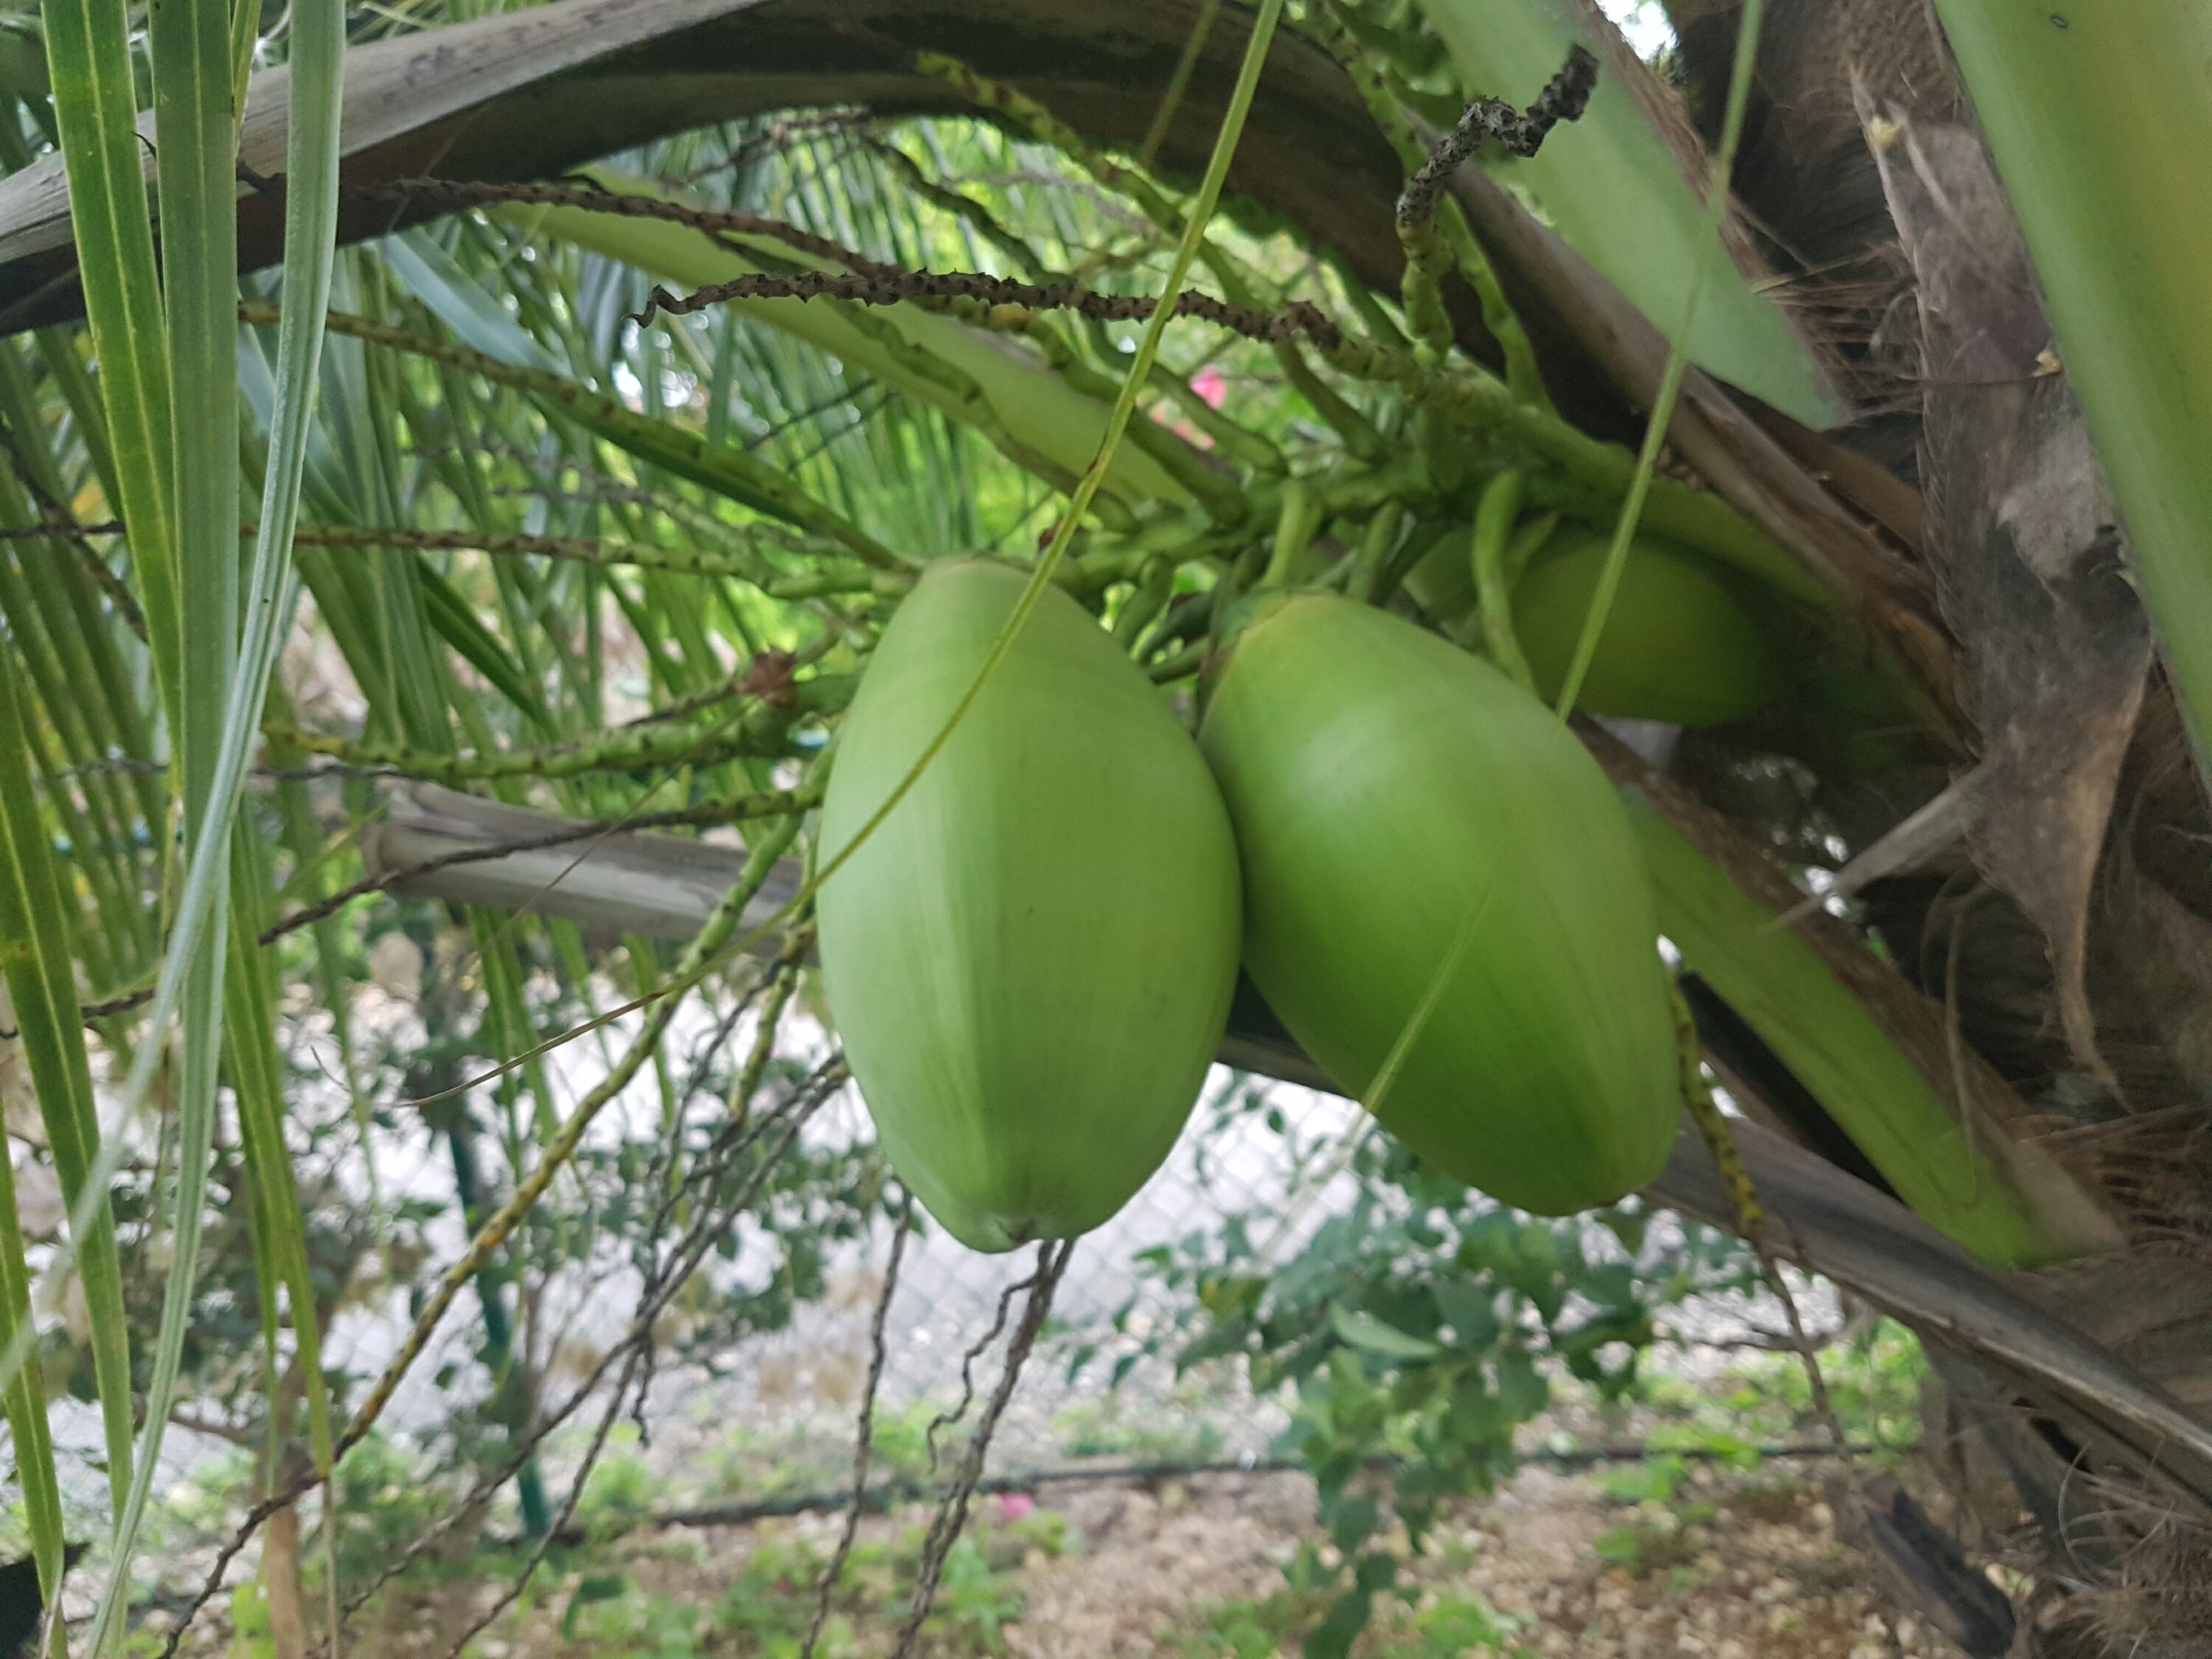 Coconuts on a tree I grew from the seed